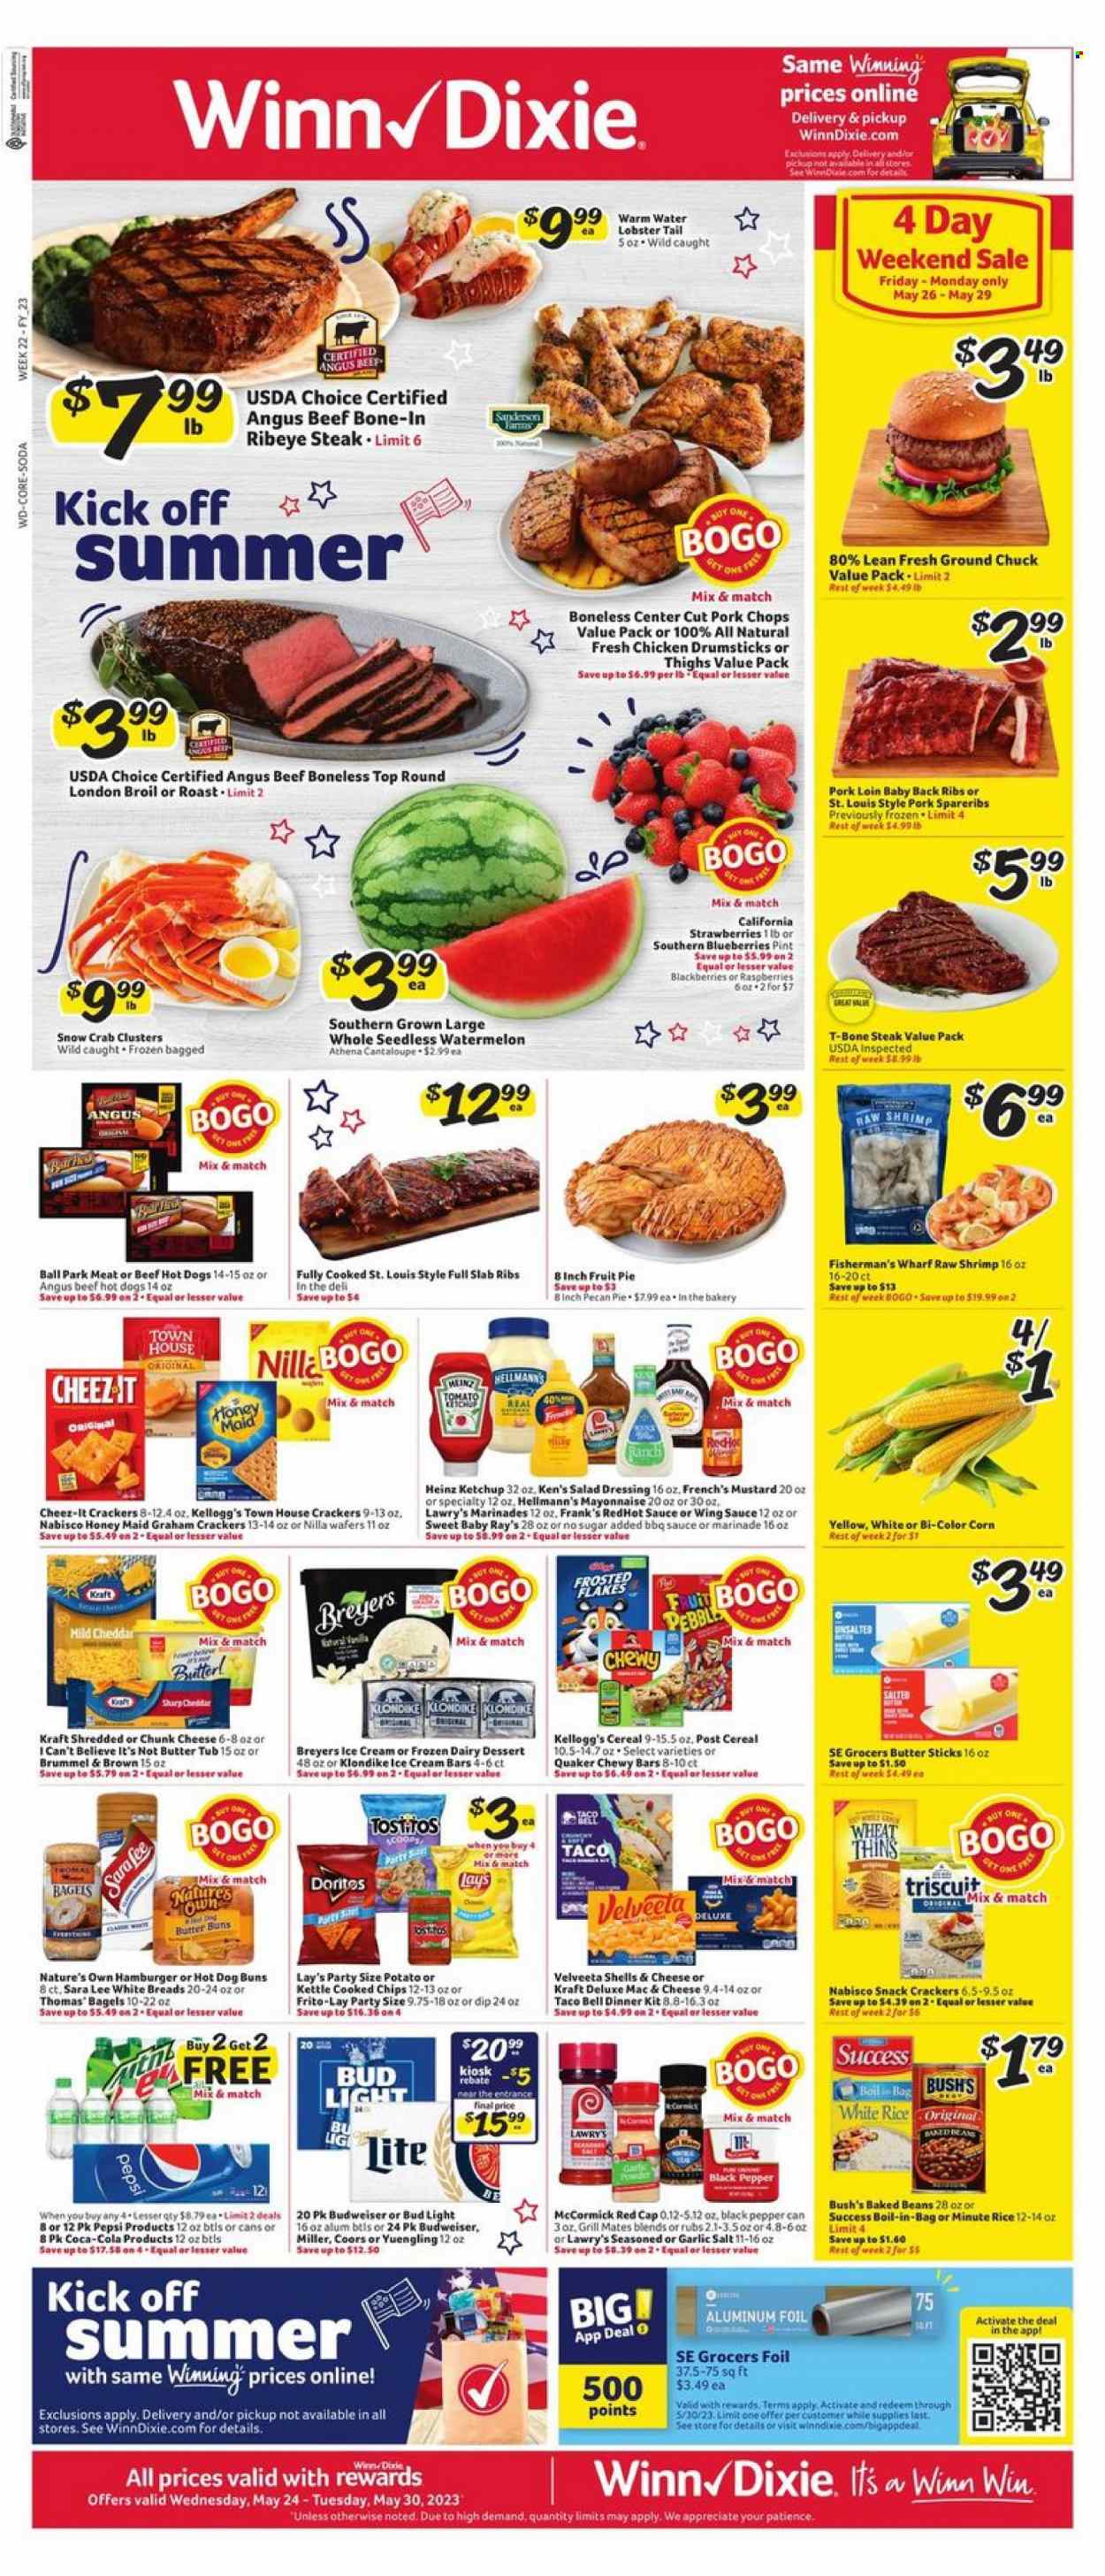 thumbnail - Winn Dixie Flyer - 05/24/2023 - 05/30/2023 - Sales products - pie, buns, Sara Lee, dessert, fruit pie, beans, cantaloupe, corn, garlic, blackberries, blueberries, raspberries, strawberries, watermelon, lobster, crab, lobster tail, shrimps, crab clusters, sauce, dinner kit, Quaker, Kraft®, roast, snack, shredded cheese, chunk cheese, I Can't Believe It's Not Butter, mayonnaise, dip, Hellmann’s, ice cream, ice cream bars, graham crackers, wafers, crackers, Kellogg's, Nabisco, Doritos, Lay’s, Thins, Frito-Lay, Cheez-It, salty snack, Heinz, baked beans, cereals, Frosted Flakes, Honey Maid, rice, white rice, black pepper, BBQ sauce, mustard, salad dressing, hot sauce, ketchup, dressing, marinade, wing sauce, Coca-Cola, Pepsi, soft drink, soda, water, beer, Bud Light, chicken drumsticks, chicken, beef meat, beef steak, ground chuck, t-bone steak, steak, bone-in ribeye, ribeye steak, ribs, pork chops, pork loin, pork meat, pork ribs, pork spare ribs, pork back ribs, aluminium foil, beef bone, Nature's Own, Budweiser, Coors, Yuengling. Page 1.